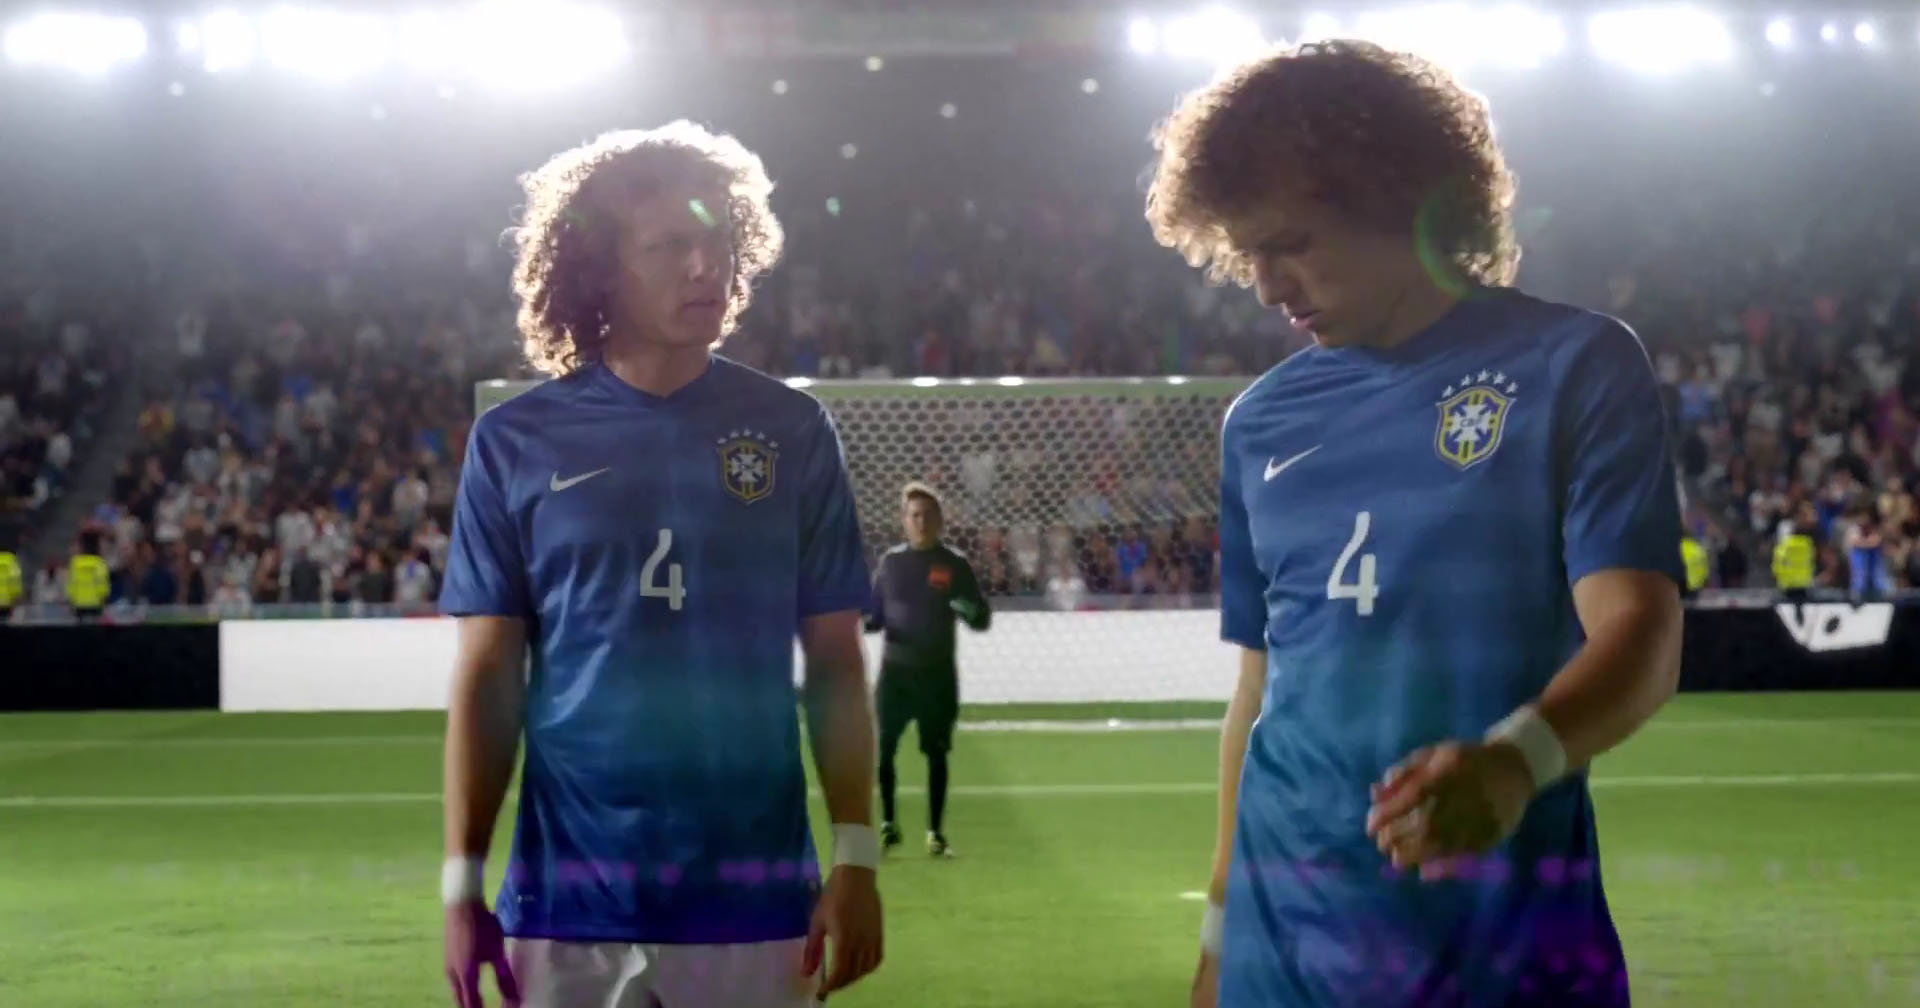 David Luiz and his twin double in the new Nike video ad